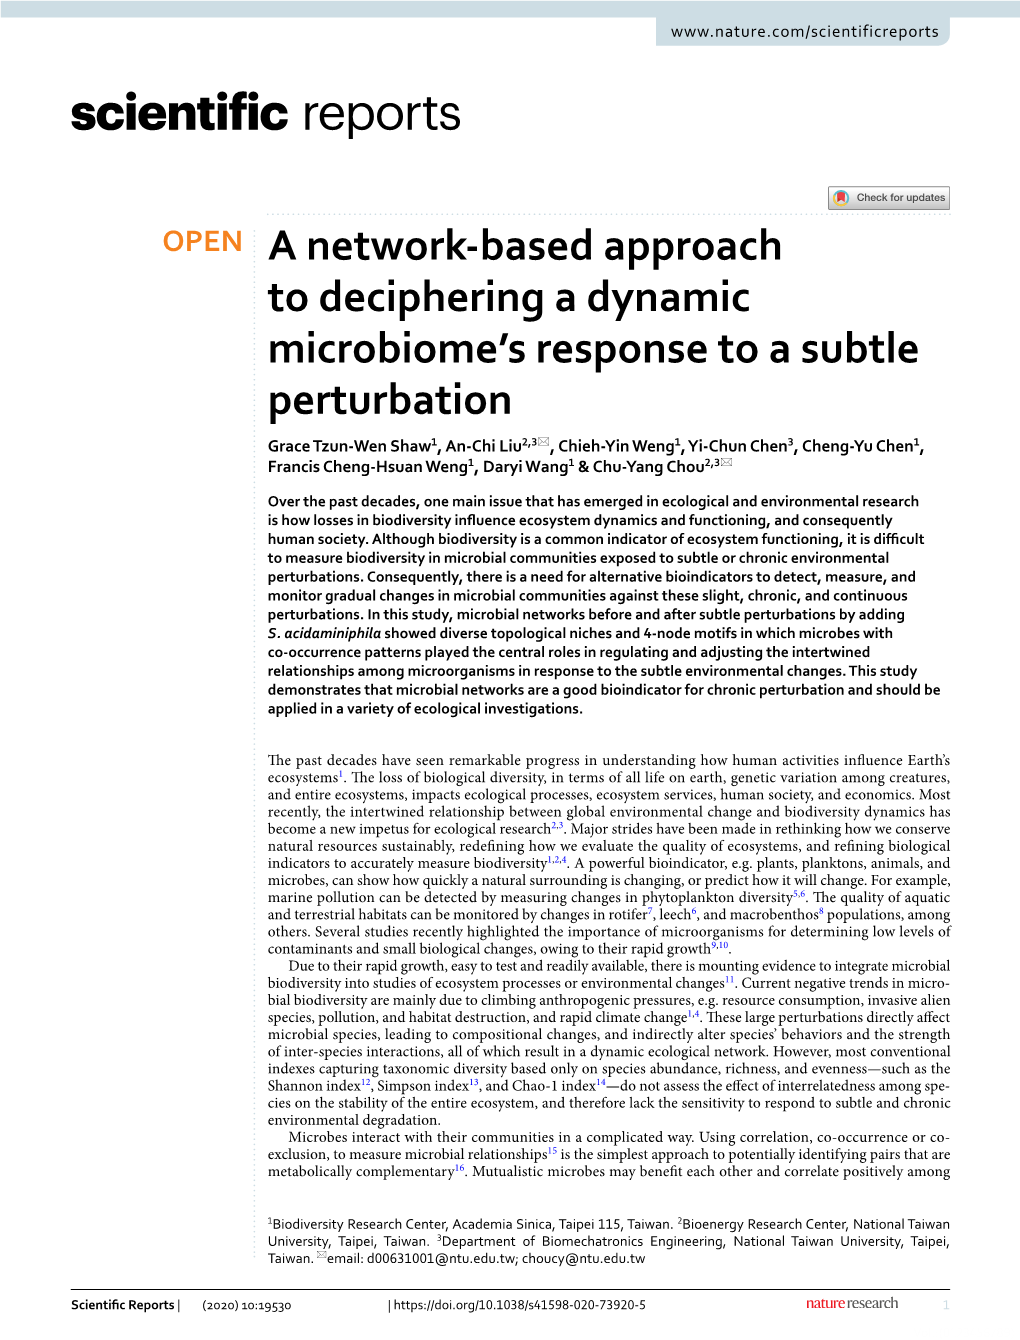 A Network-Based Approach to Deciphering a Dynamic Microbiome's Response to a Subtle Perturbation